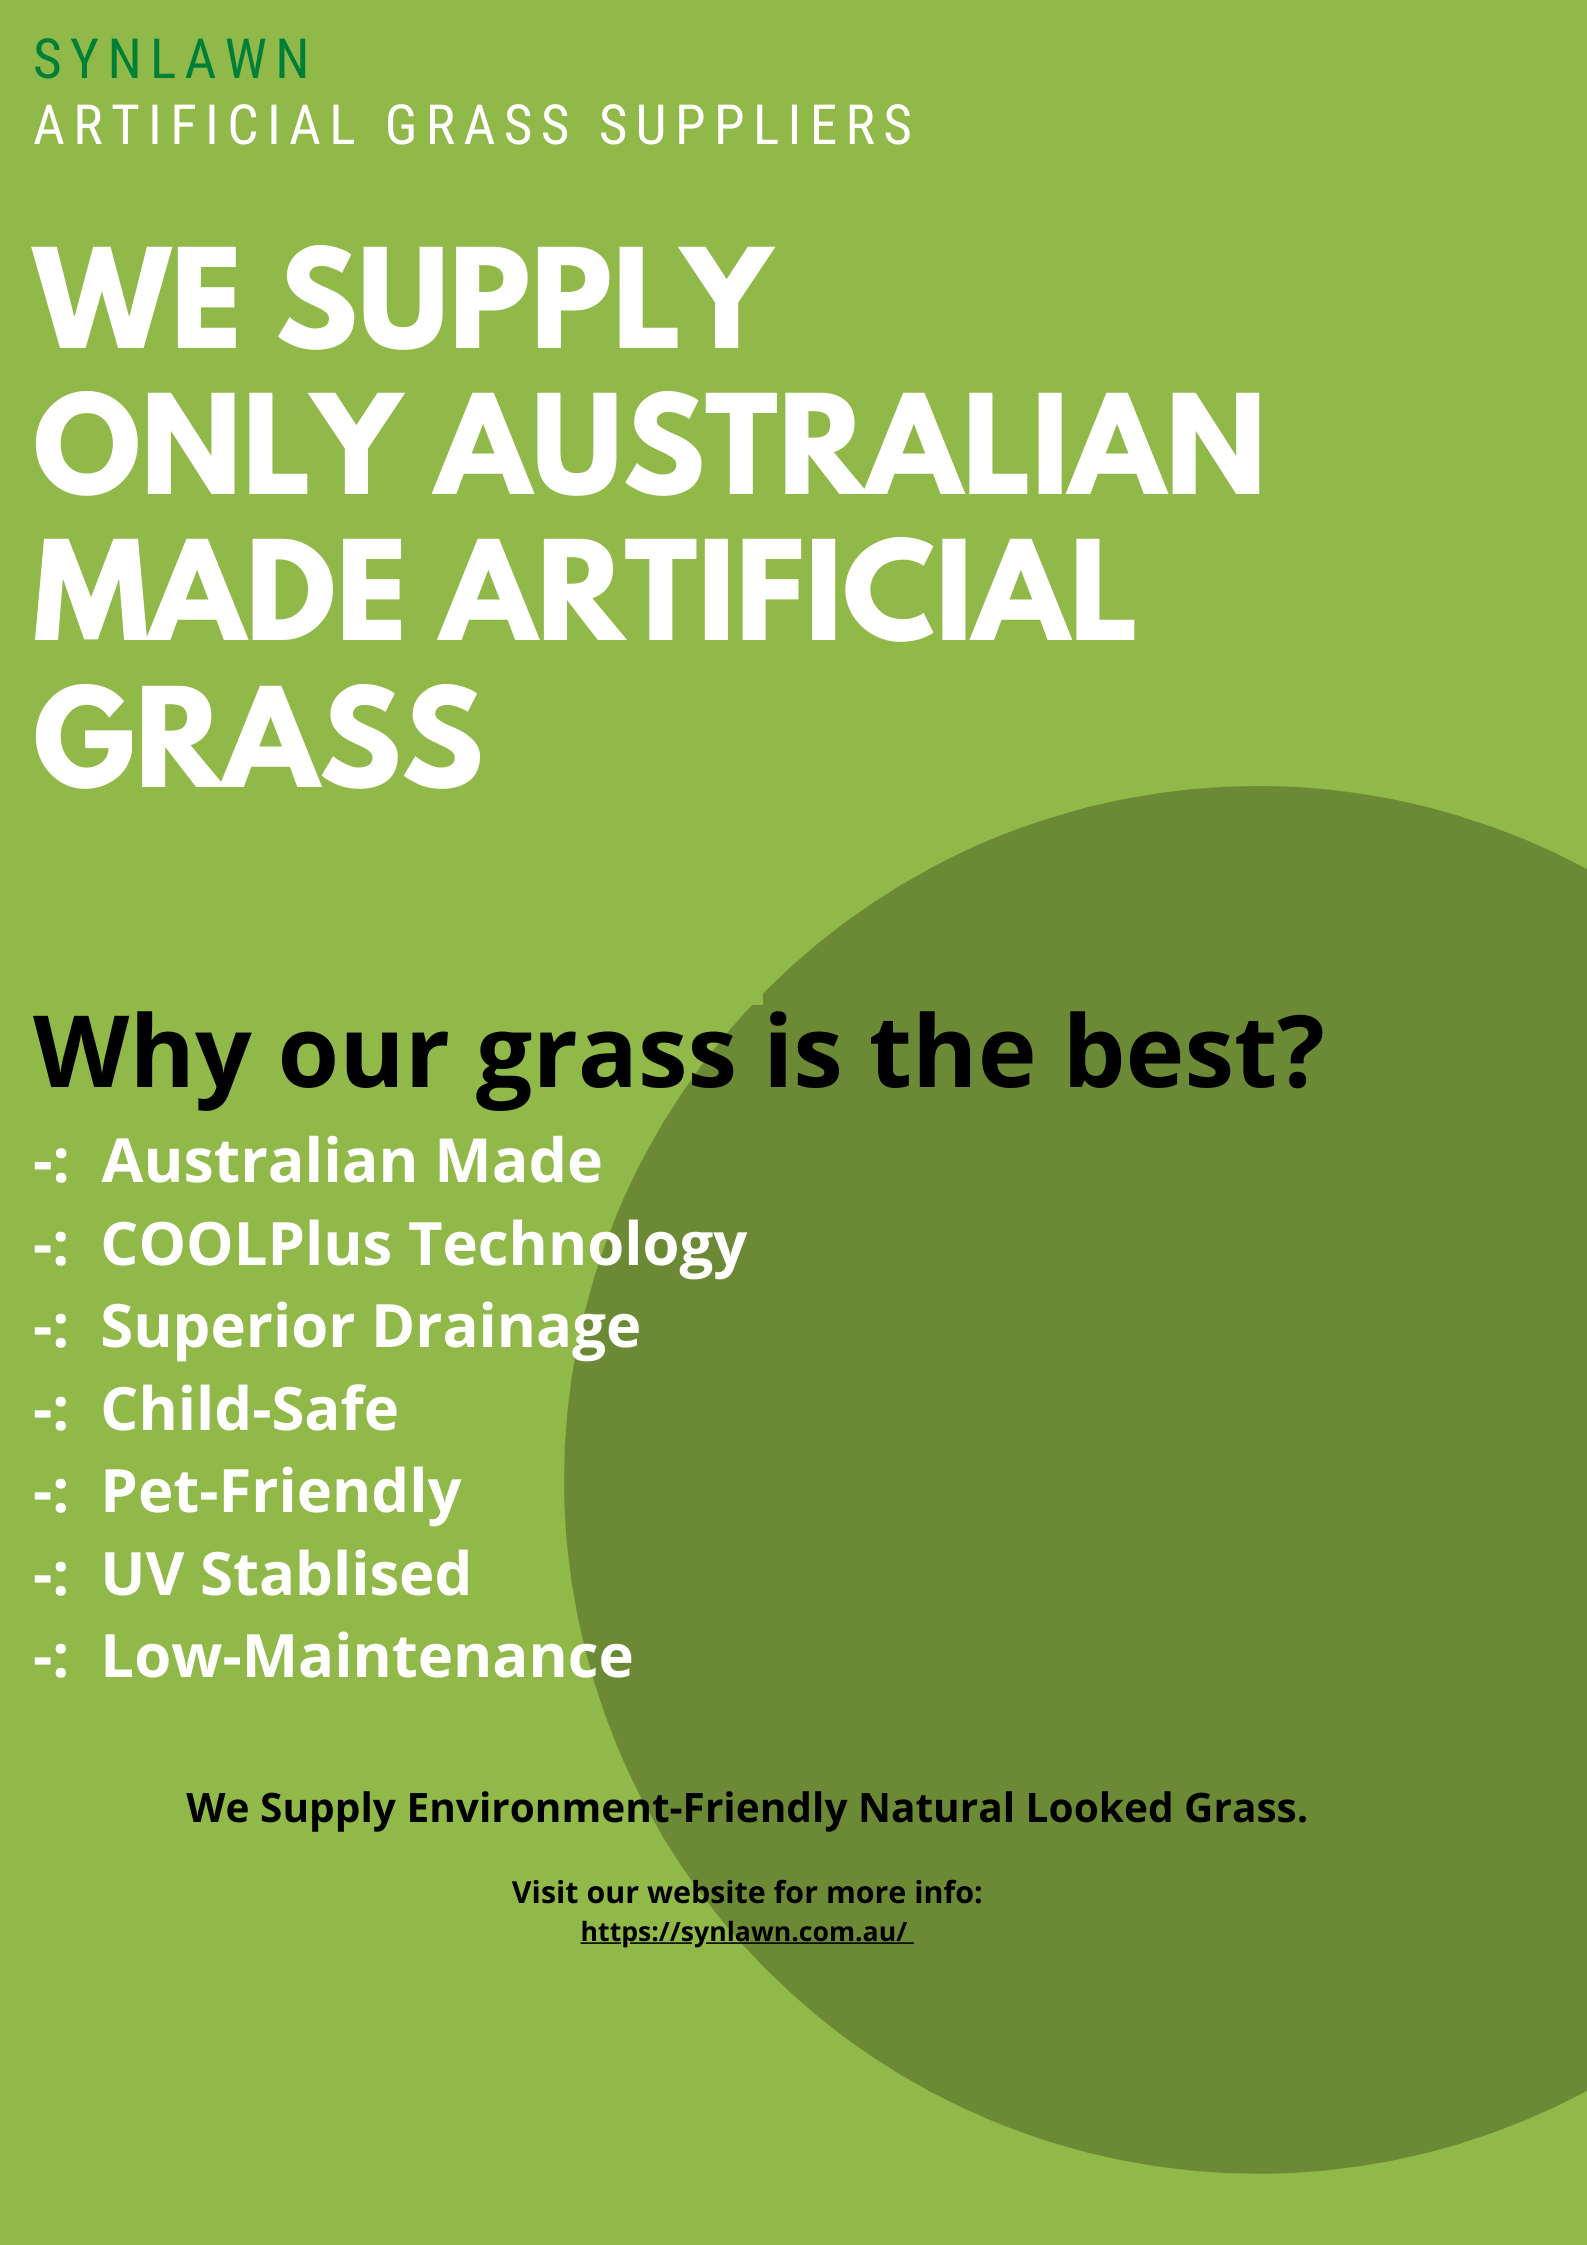 Looking for high-quality artificial grass in Melbourne? Contact Synlawn. We are the no.1 suppliers and manufacturers in Melbourne. 

https://synlawn.com.au/artificial-grass-melbourne/